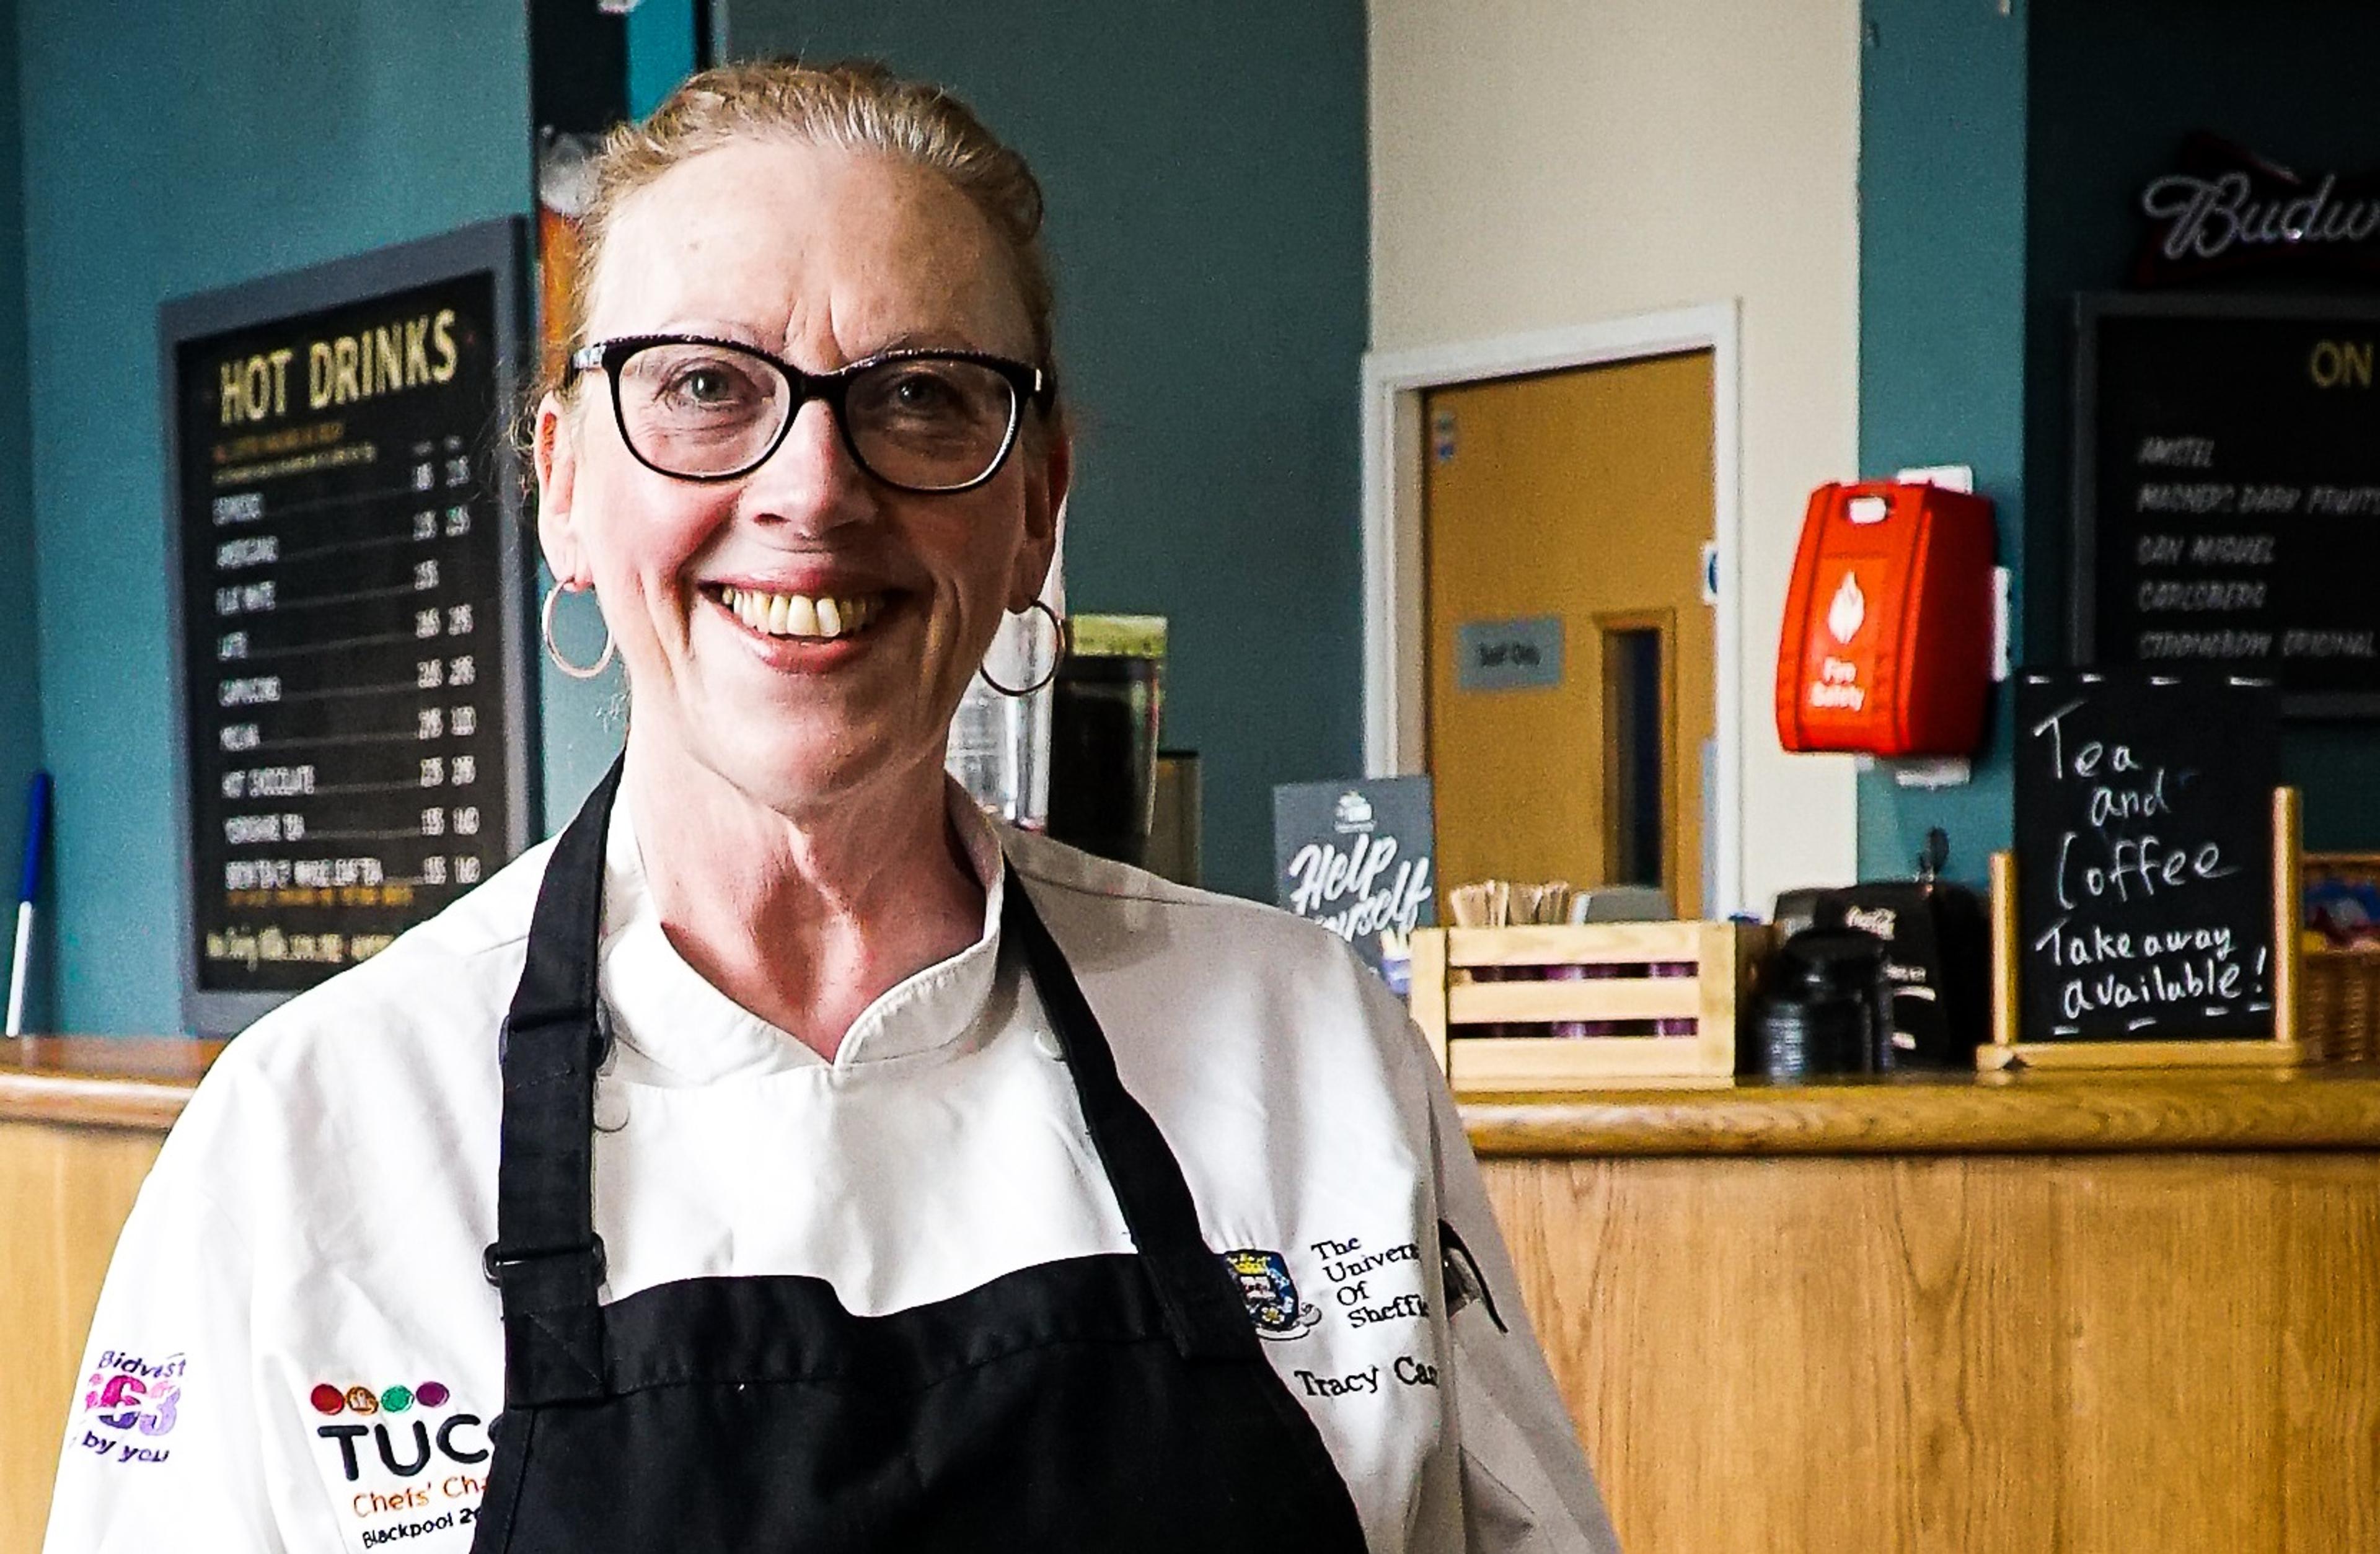 A woman stands in front of a restaurant bar, indoors, wearing an apron and facing the camera, smiling. The woman is University of Sheffield Executive Chef, Tracey Carr.